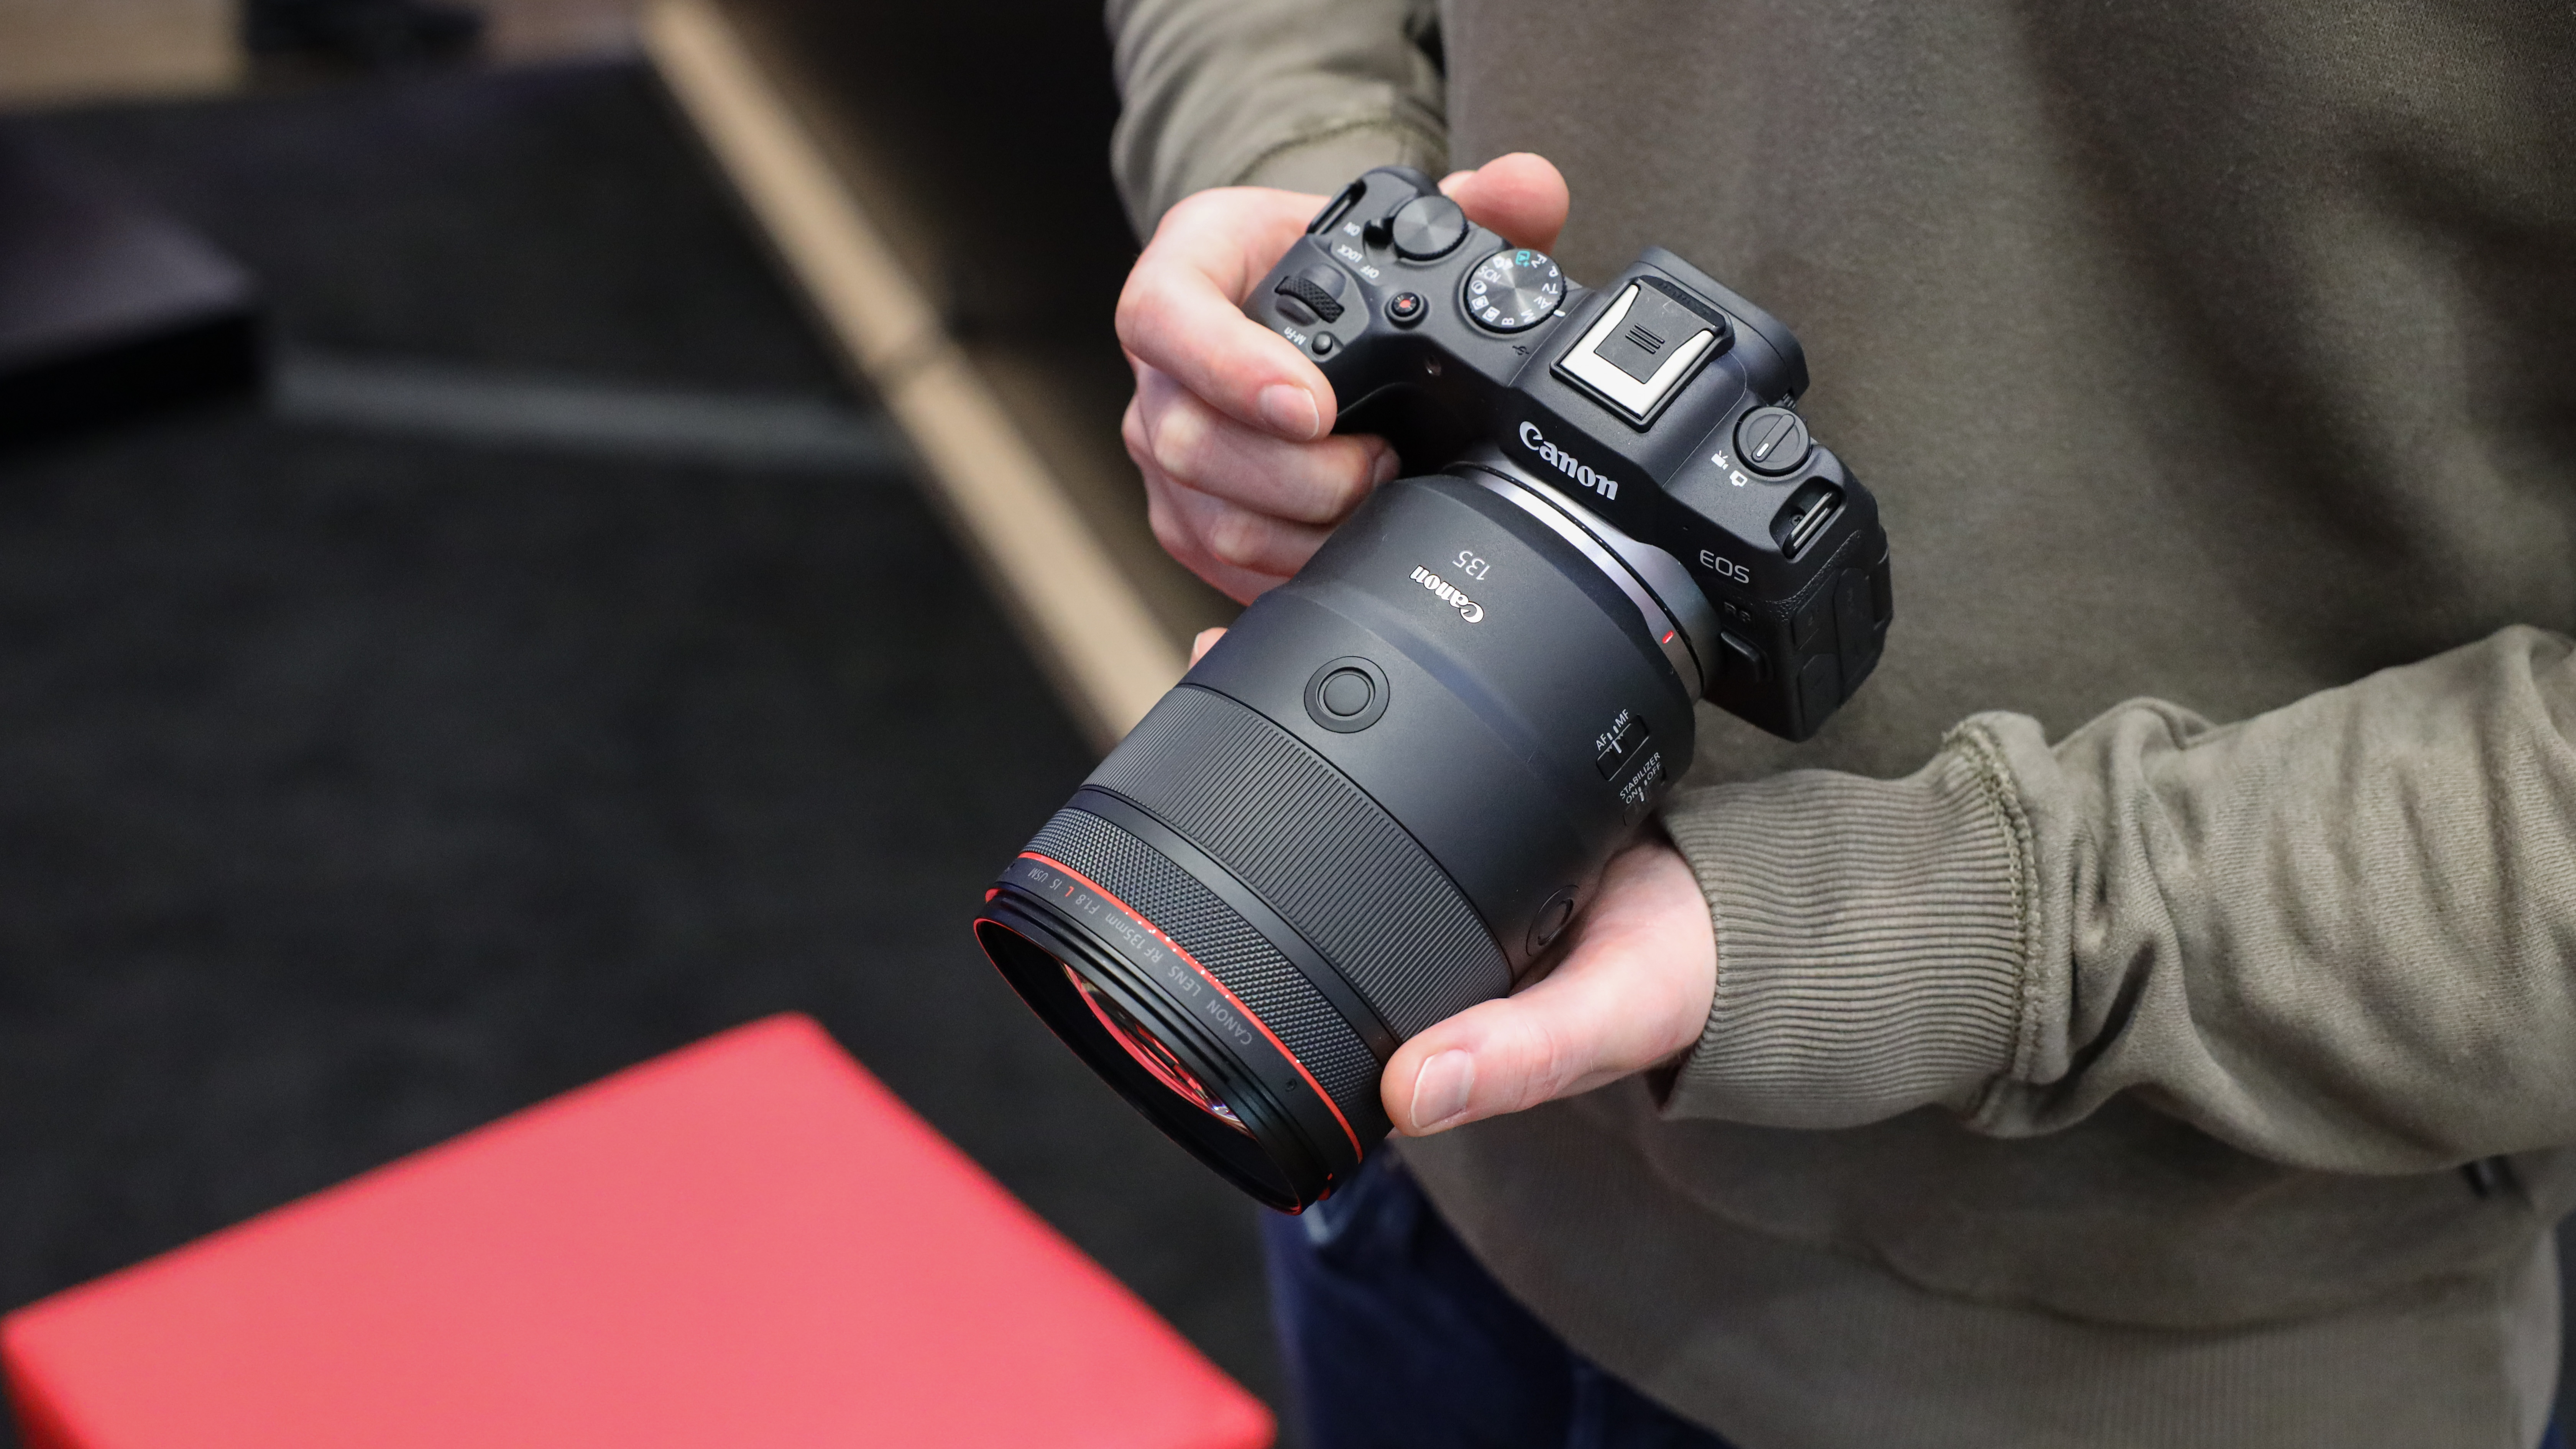 Canon RF 35mm f/1.8 Review - The Photography Enthusiast